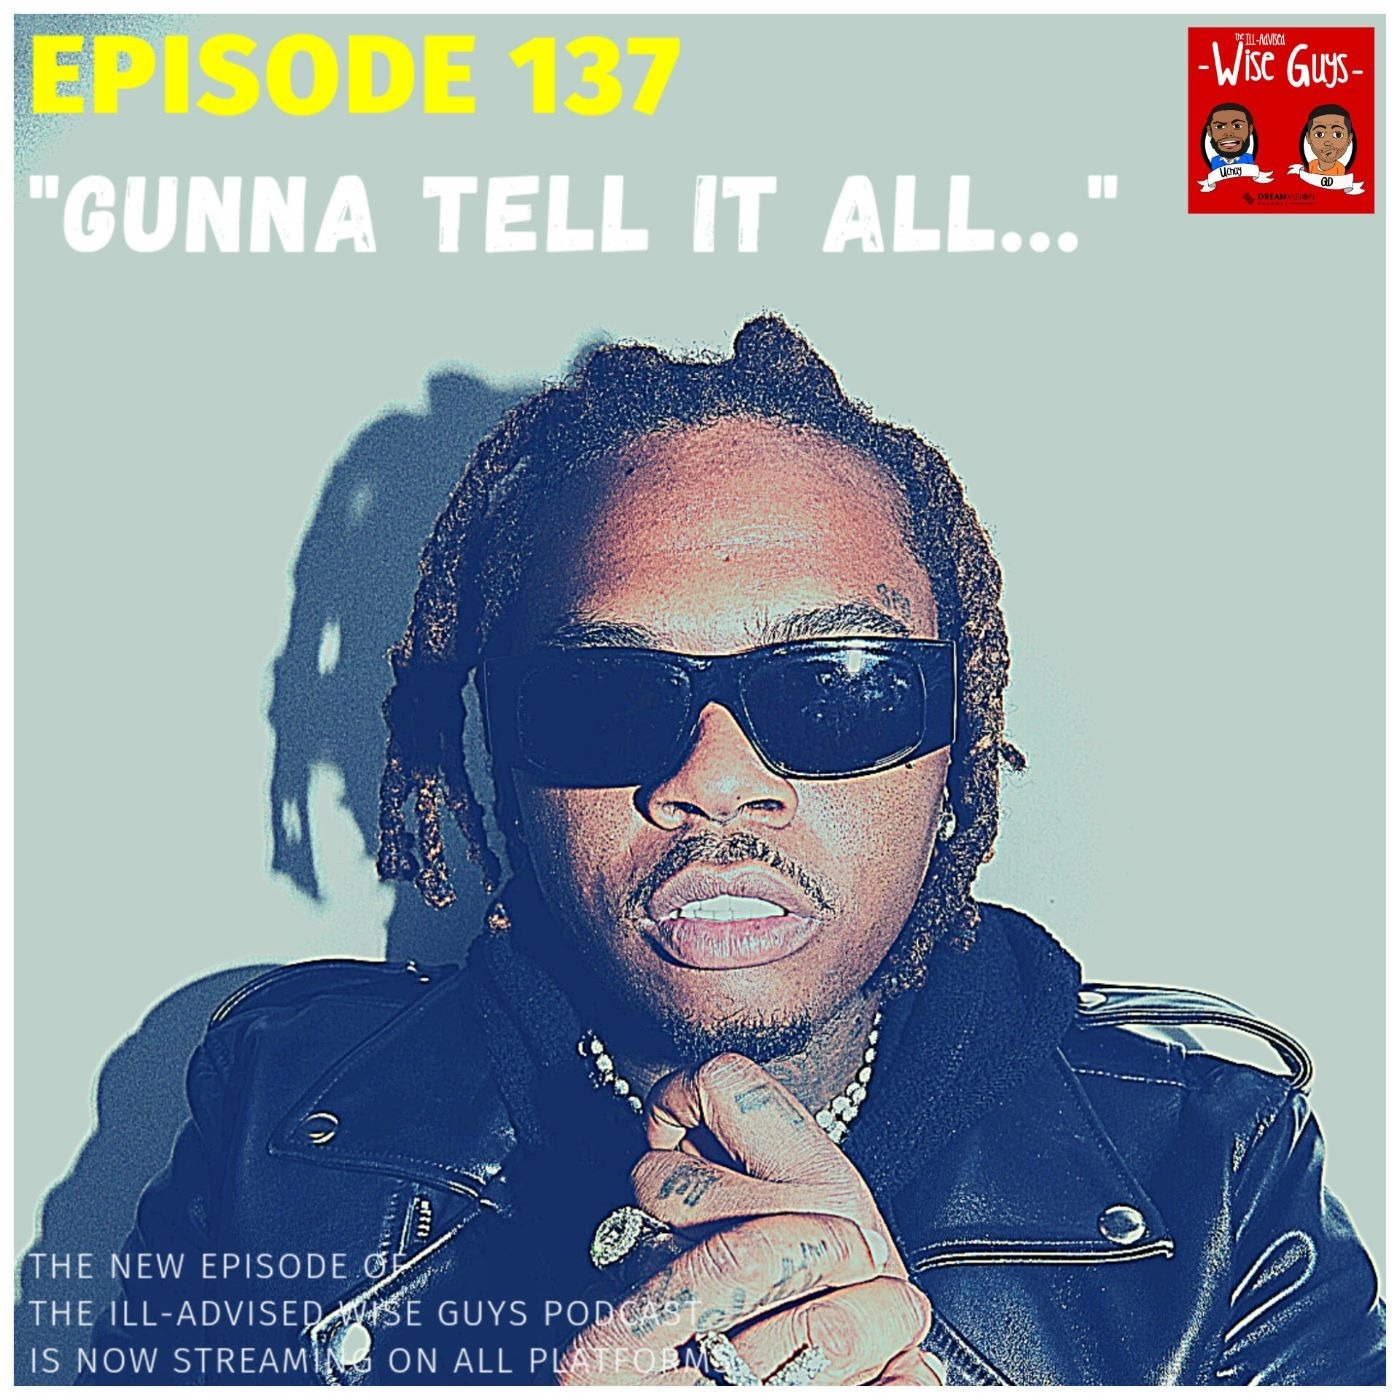 Episode 137 - "Gunna Tell It All..." Image